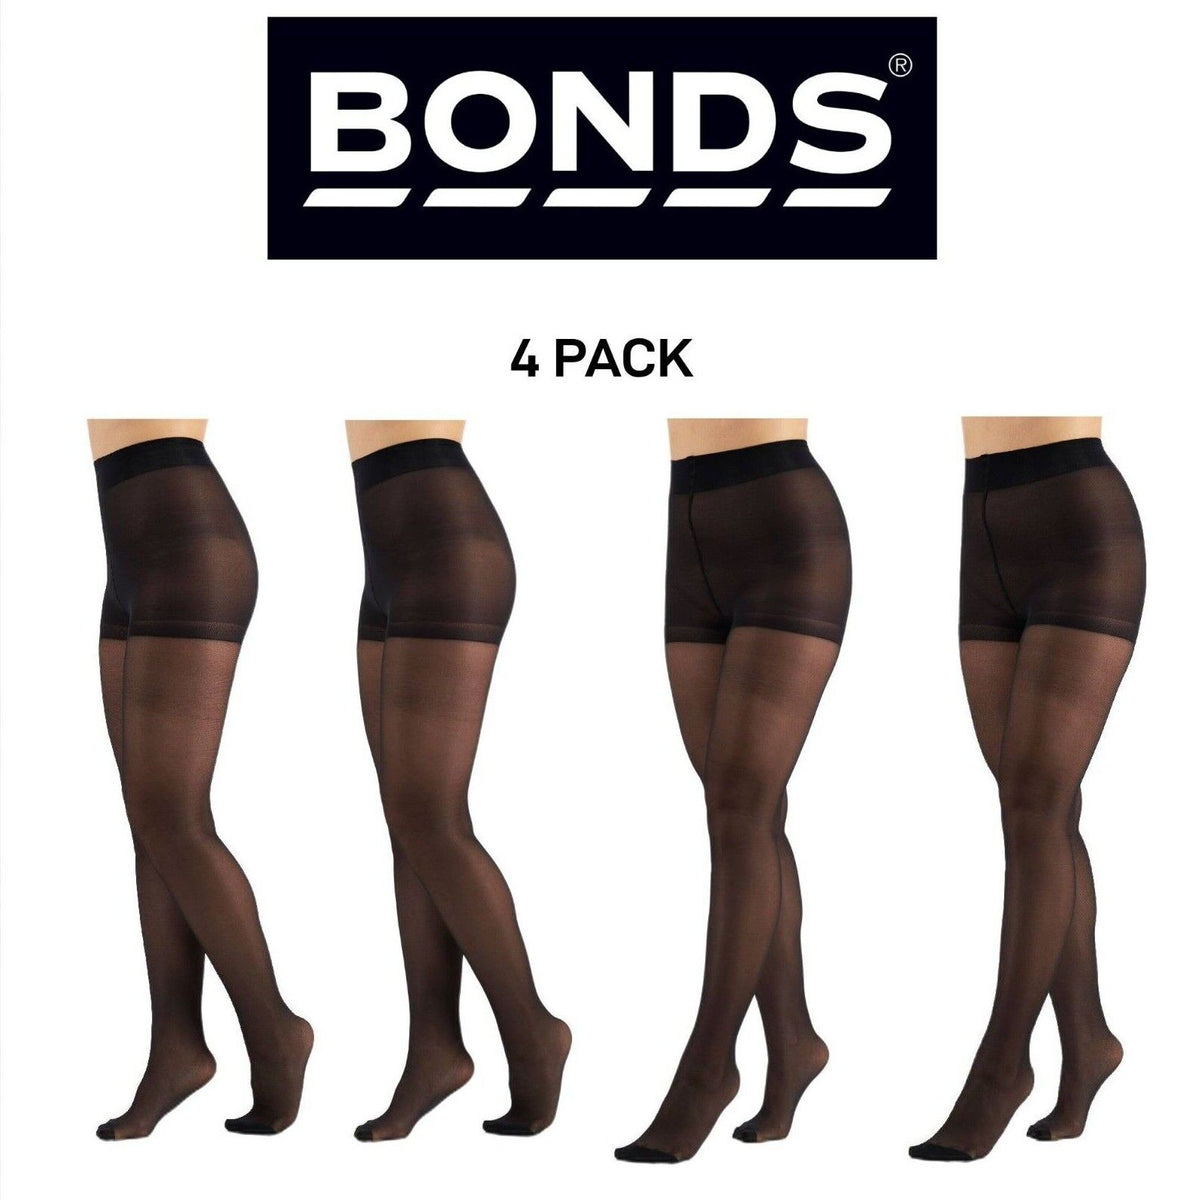 Bonds Womens Sheer Slimming Tights Comfortable Top Waistband 4 Pack L79570